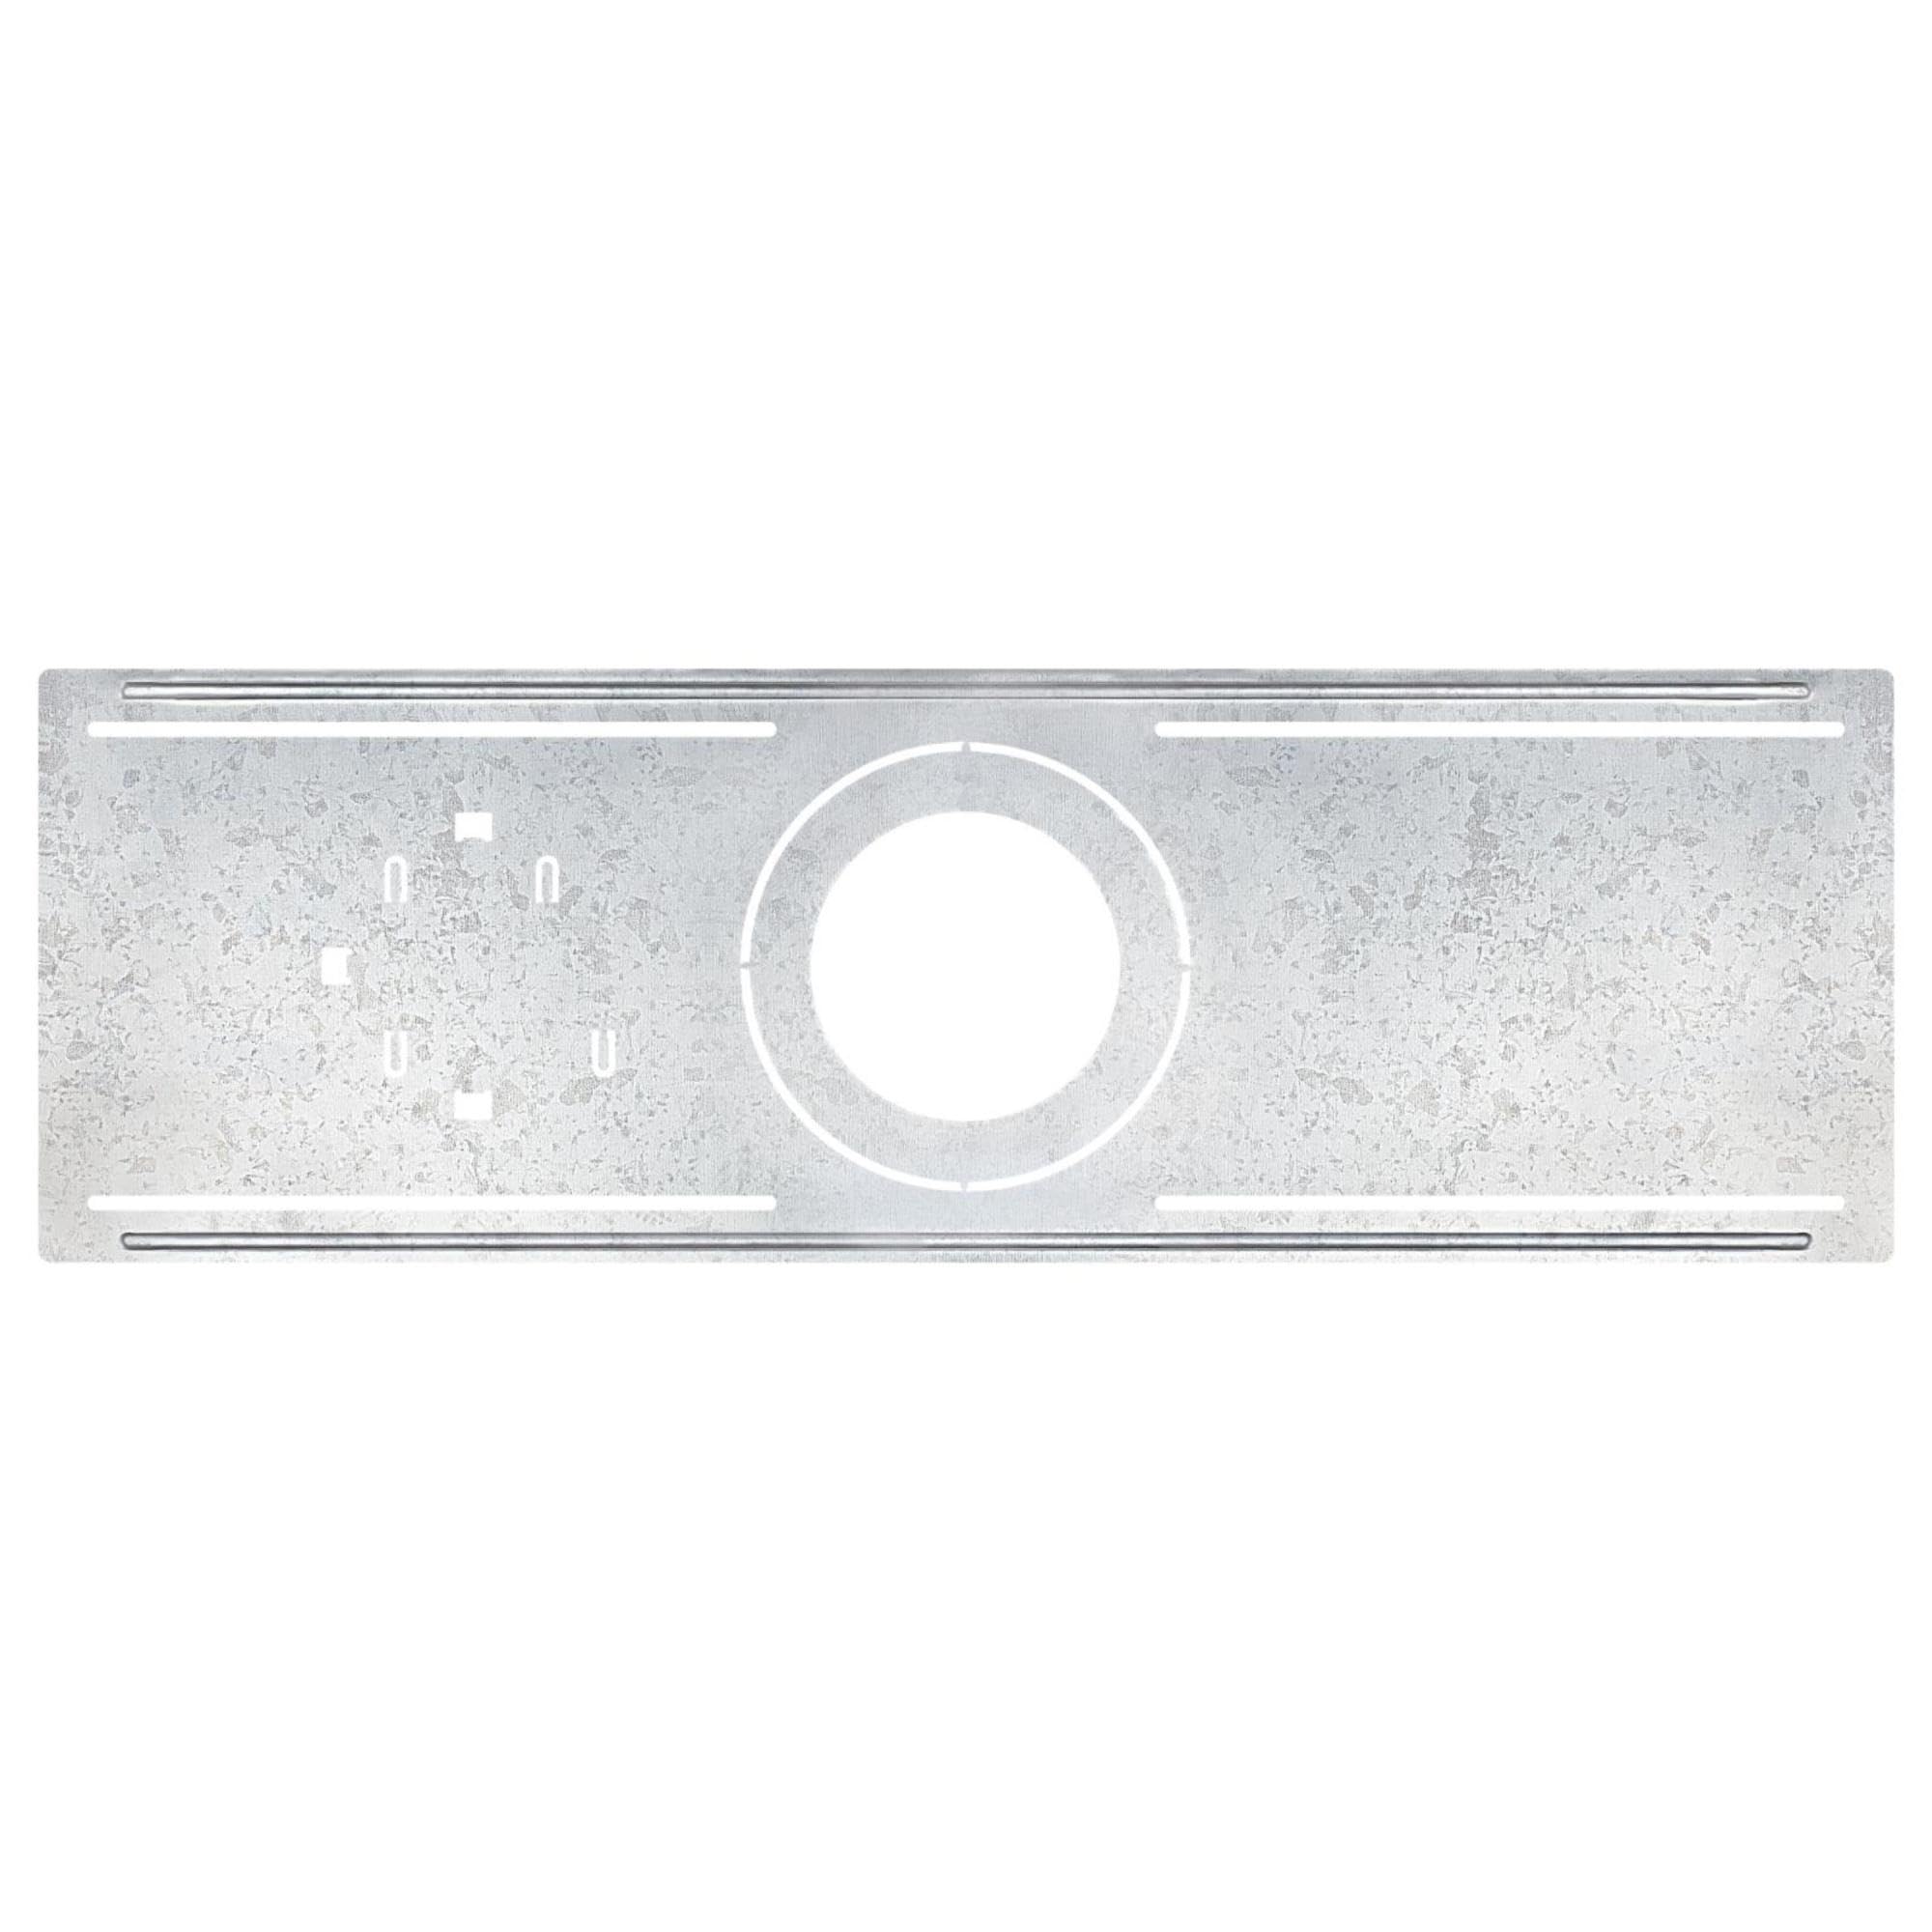 Westinghouse Lighting Bracket for 4-Inch and 6-Inch Slim Recessed Downlights